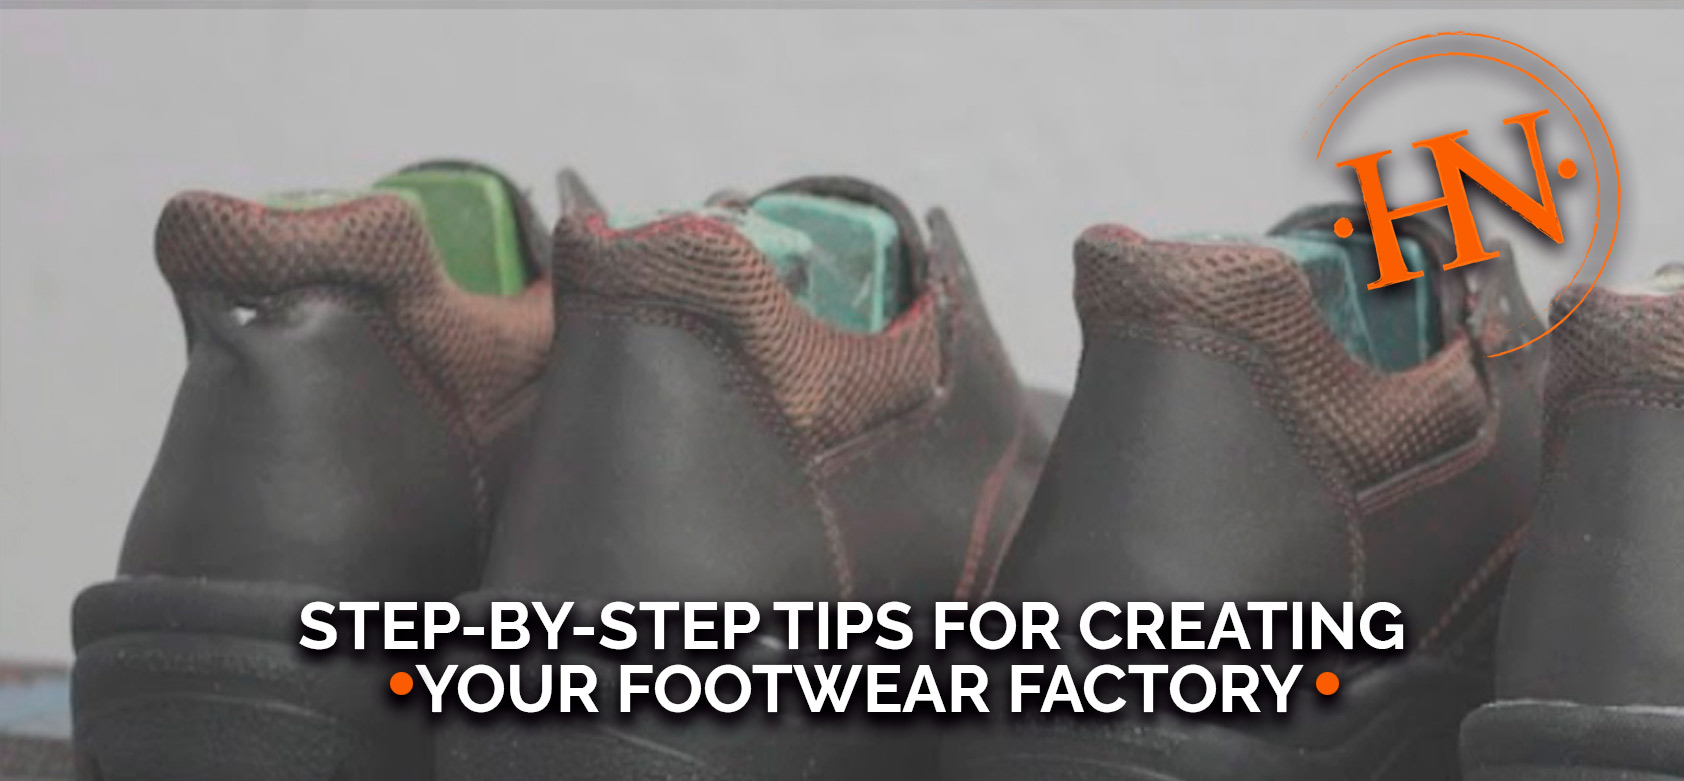 Step-by-step-tips-for-creating-your-footwear-factory